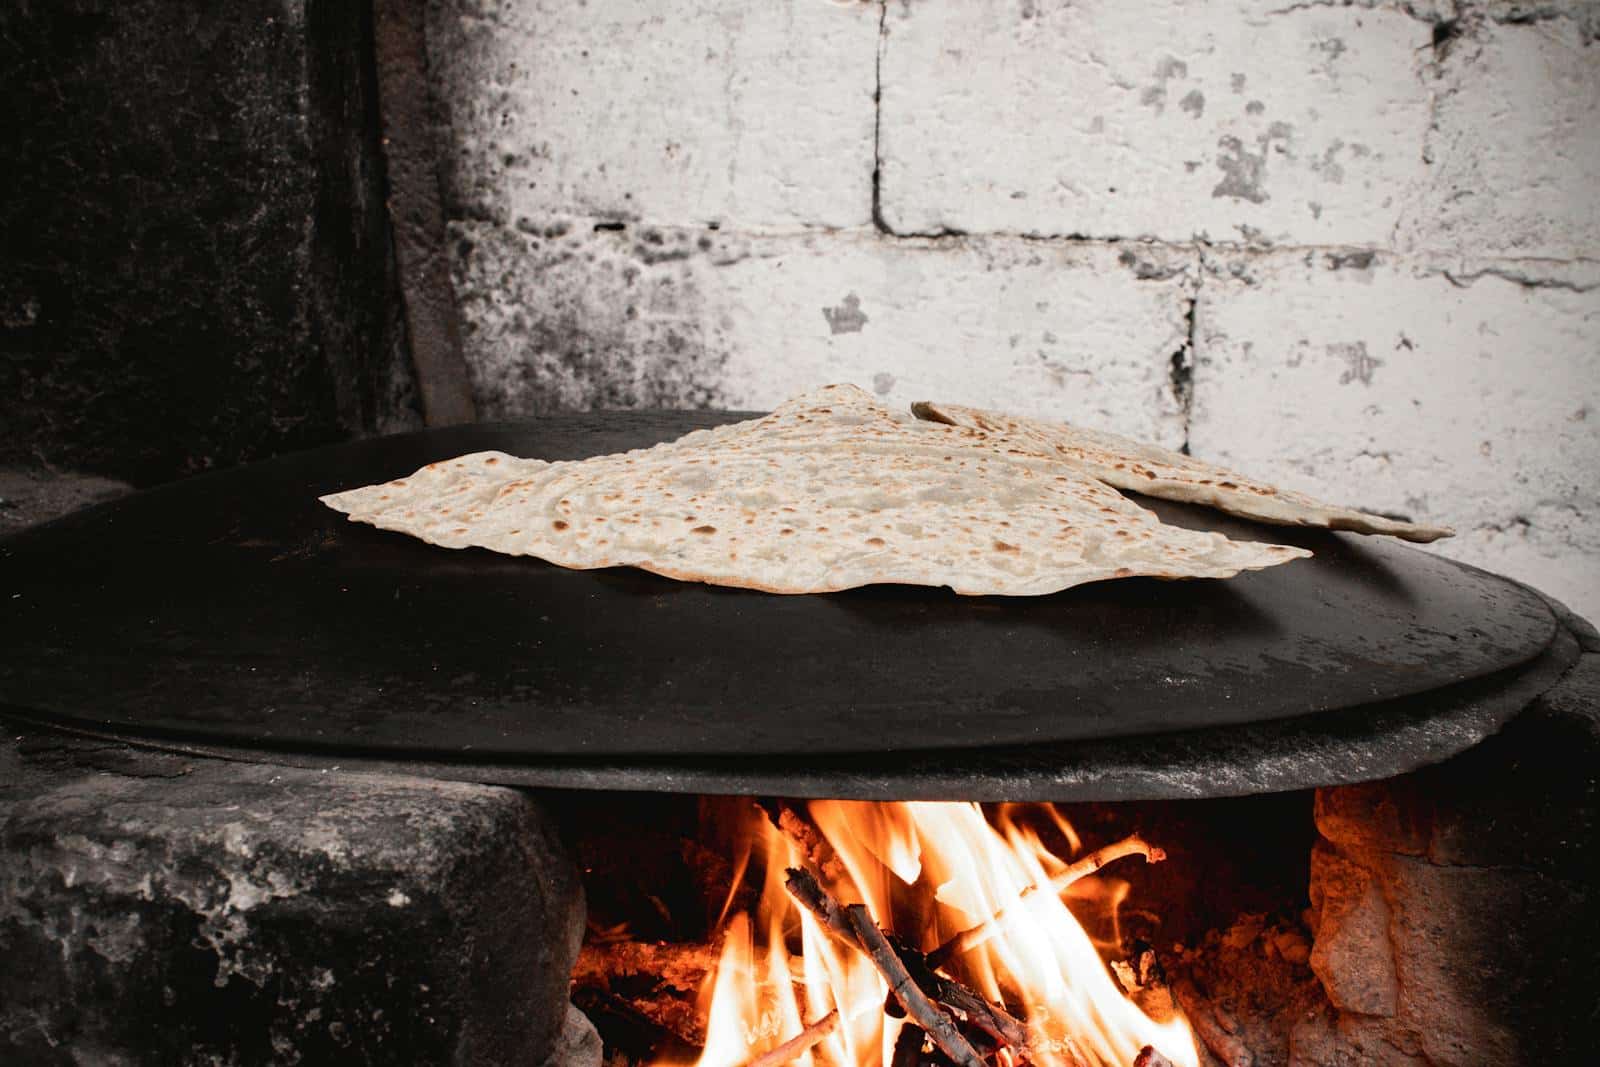 Flatbread Frying on the Hearth